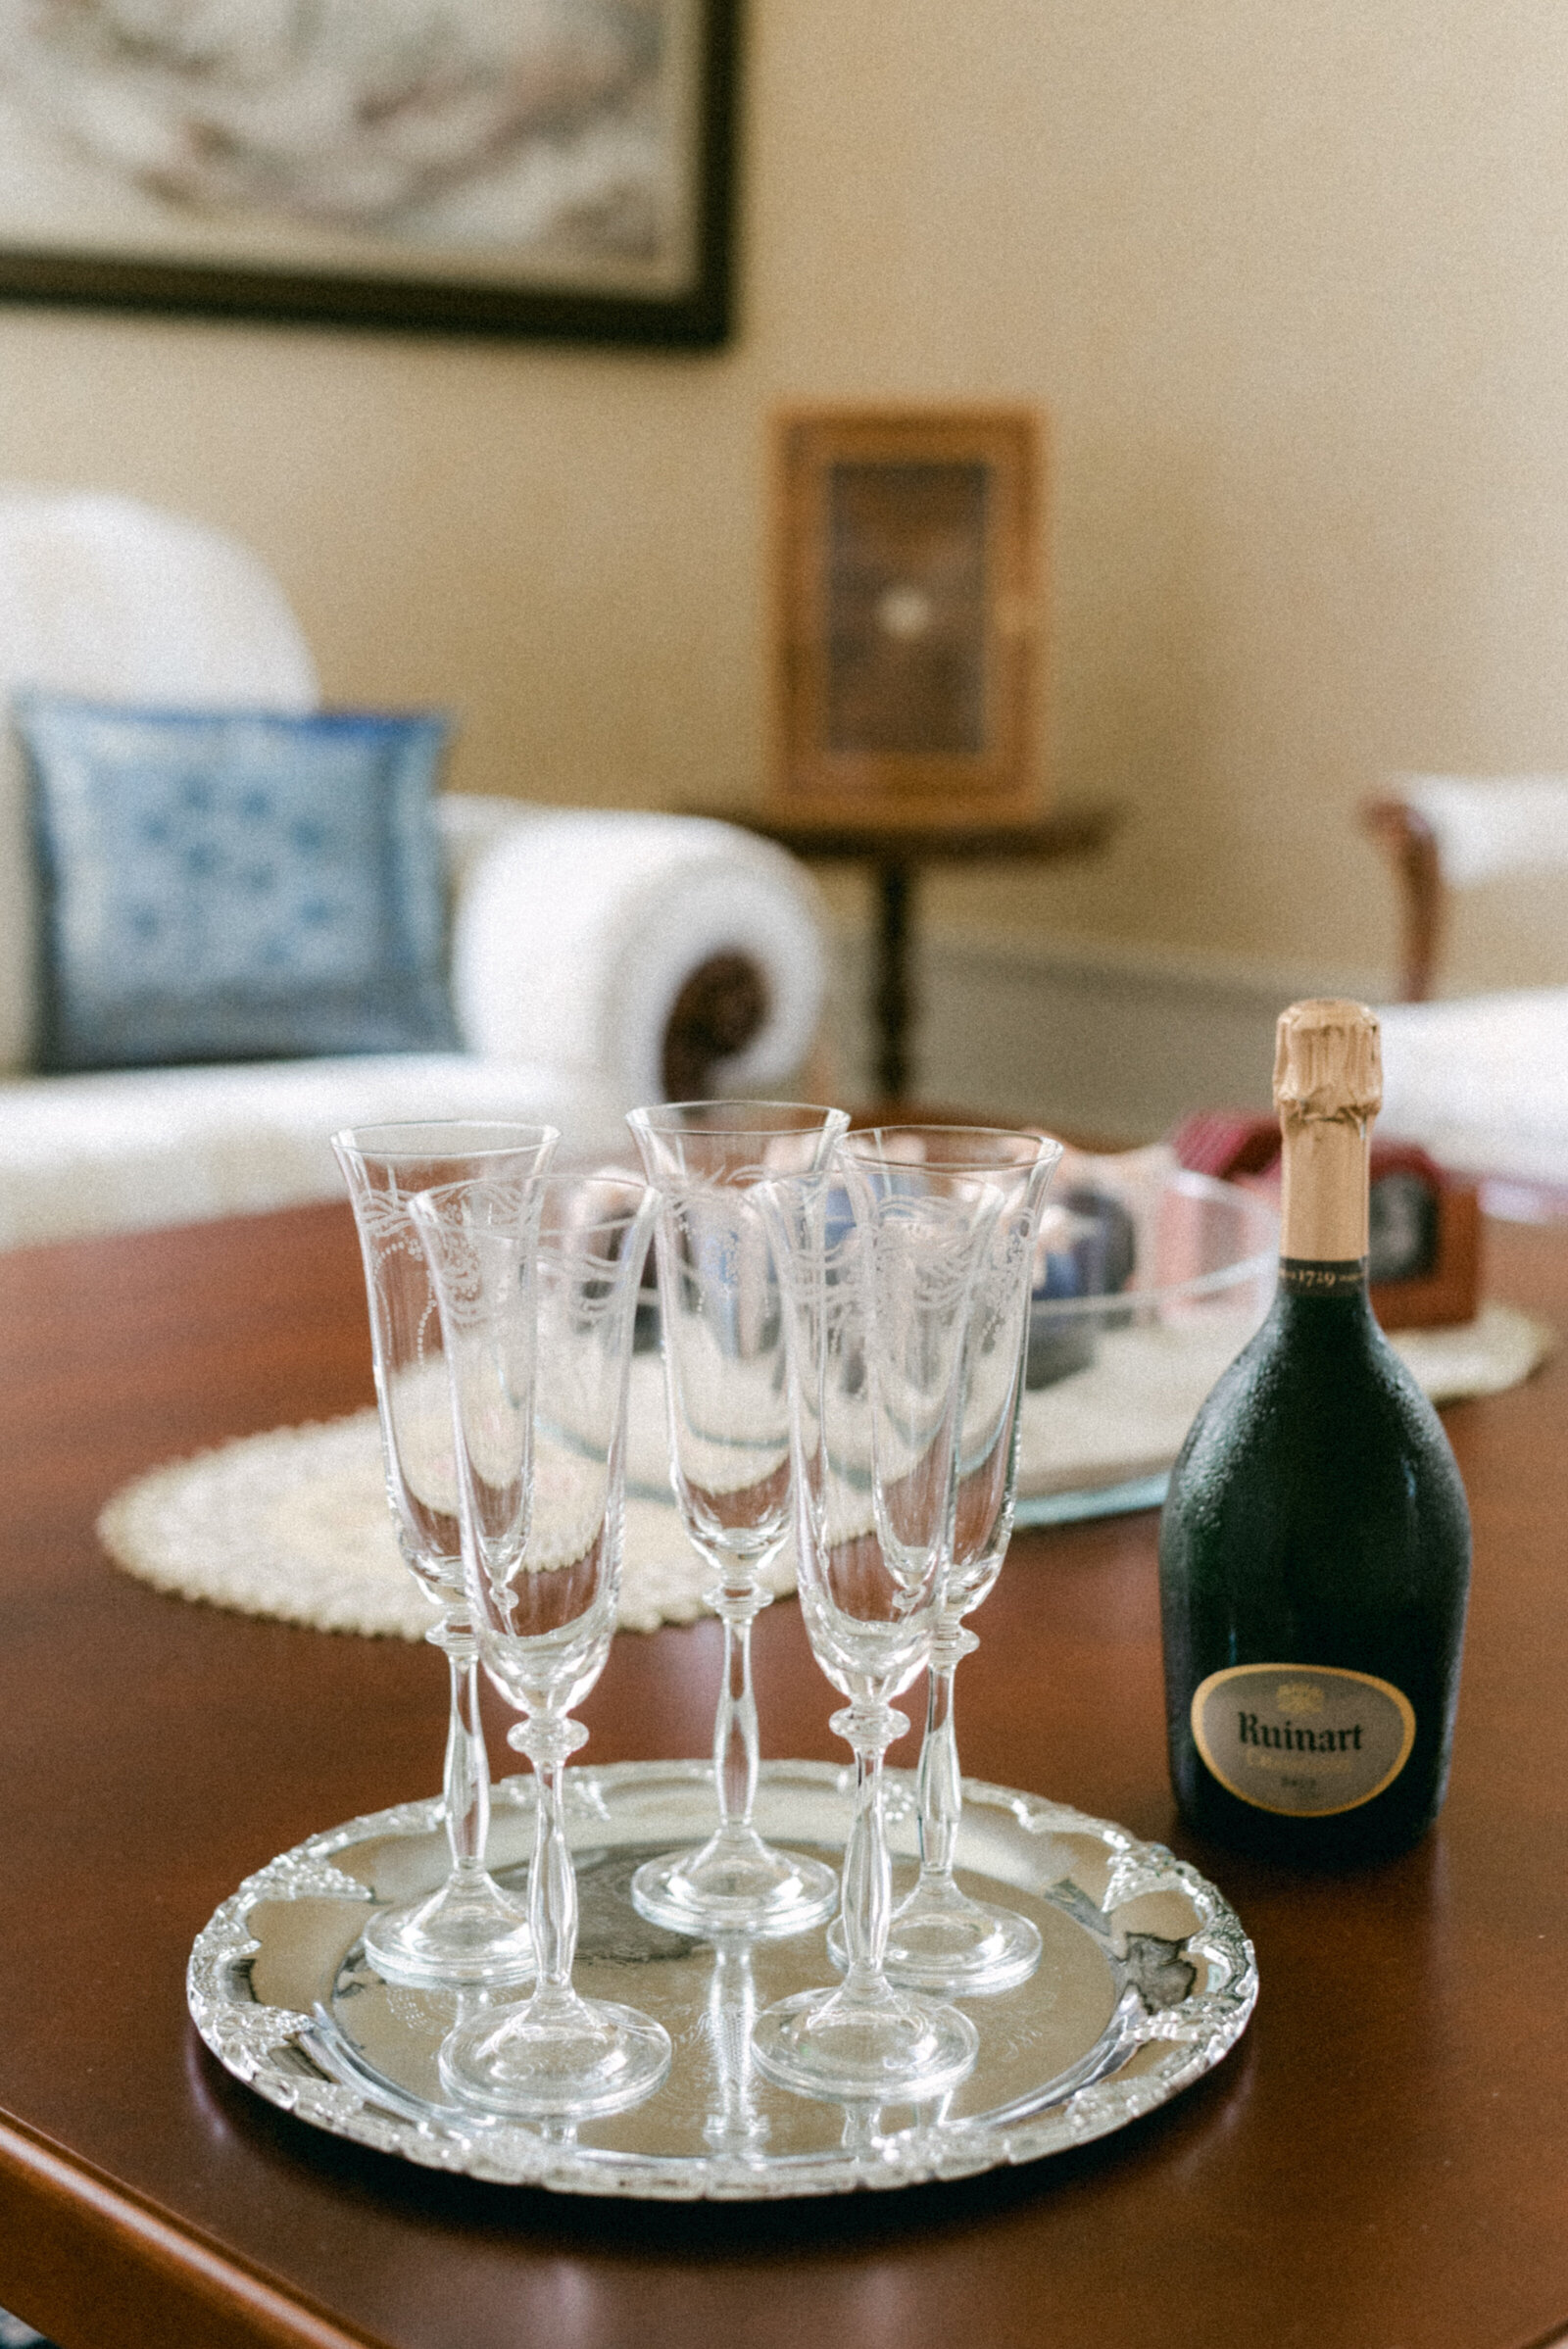 Champagne glasses in an image photographed by wedding photographer Hannika Gabrielsson.